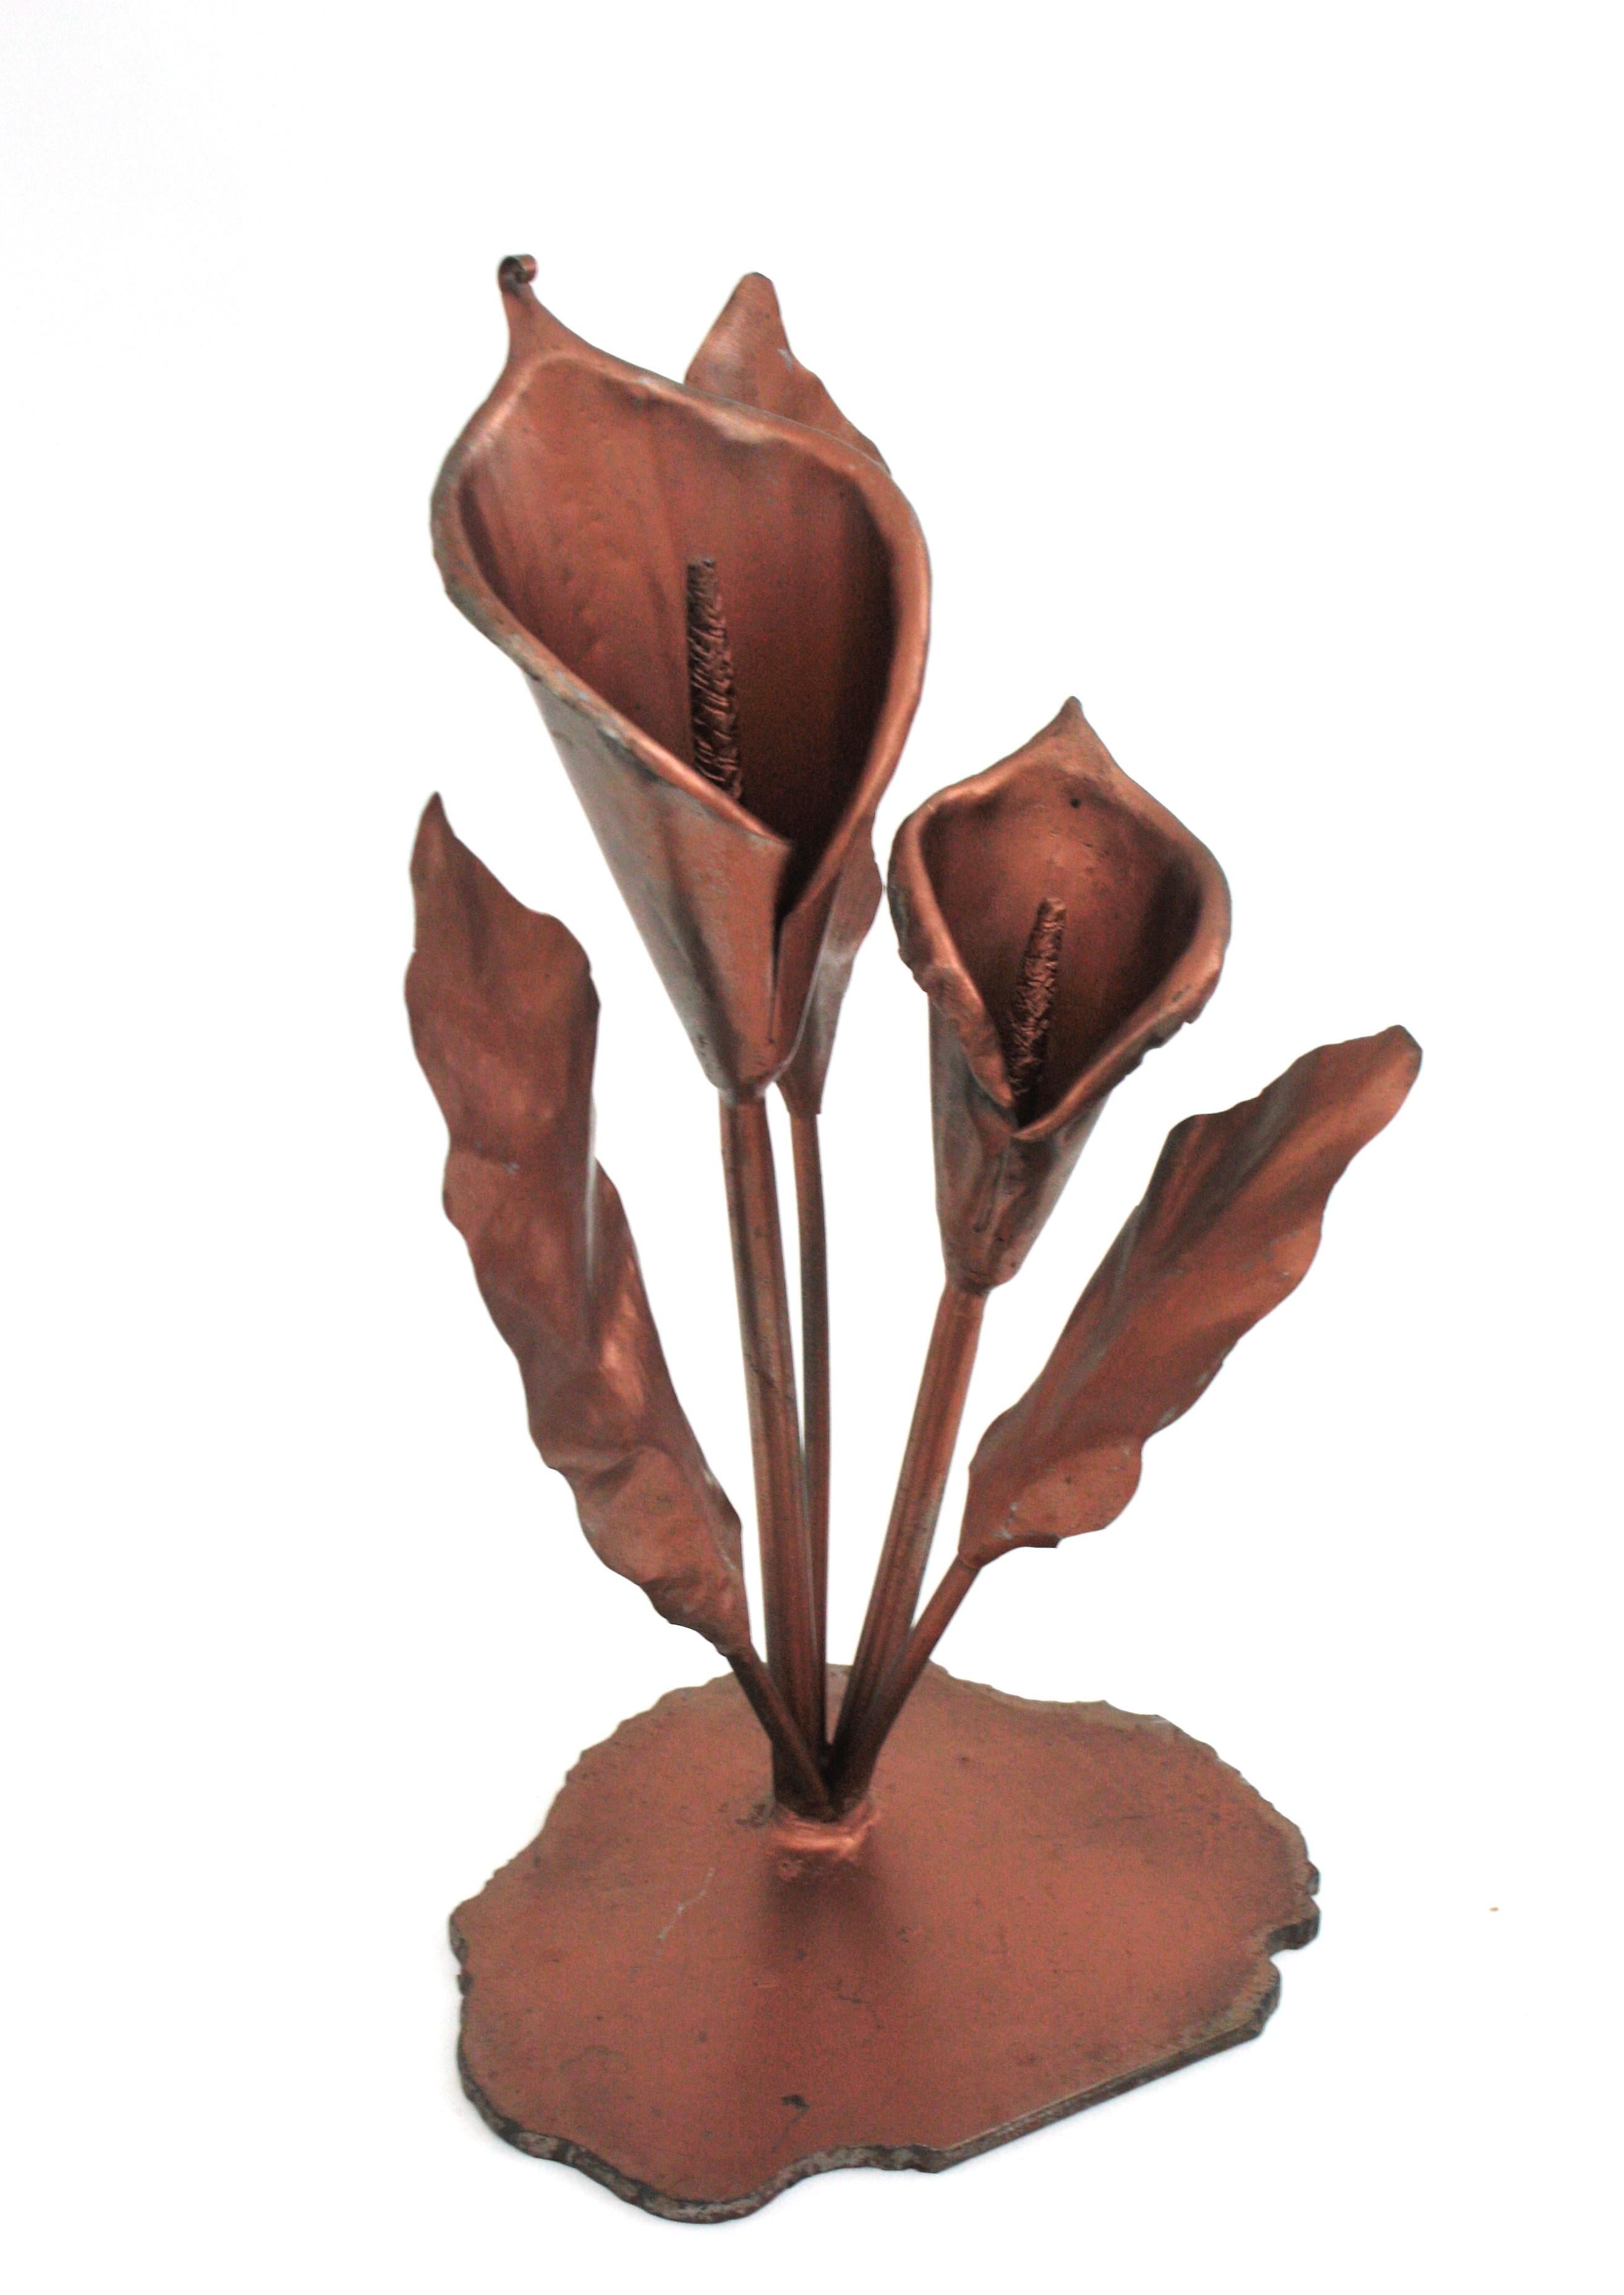 Hand-Crafted Calla Lily Foliage Flower Sculpure or Paperweight in Copper Metal For Sale